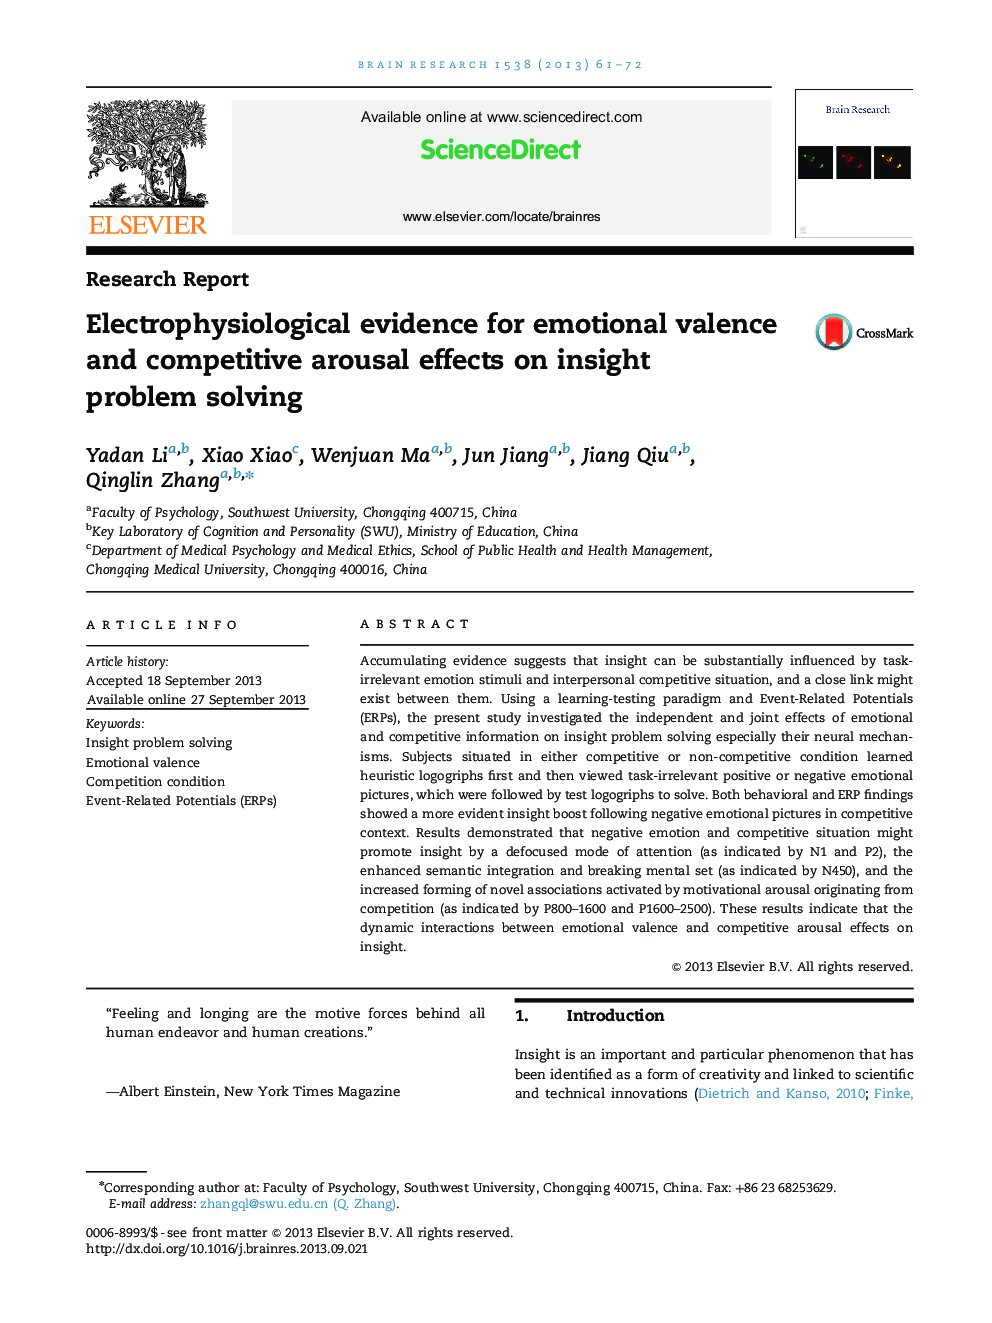 Research ReportElectrophysiological evidence for emotional valence and competitive arousal effects on insight problem solving